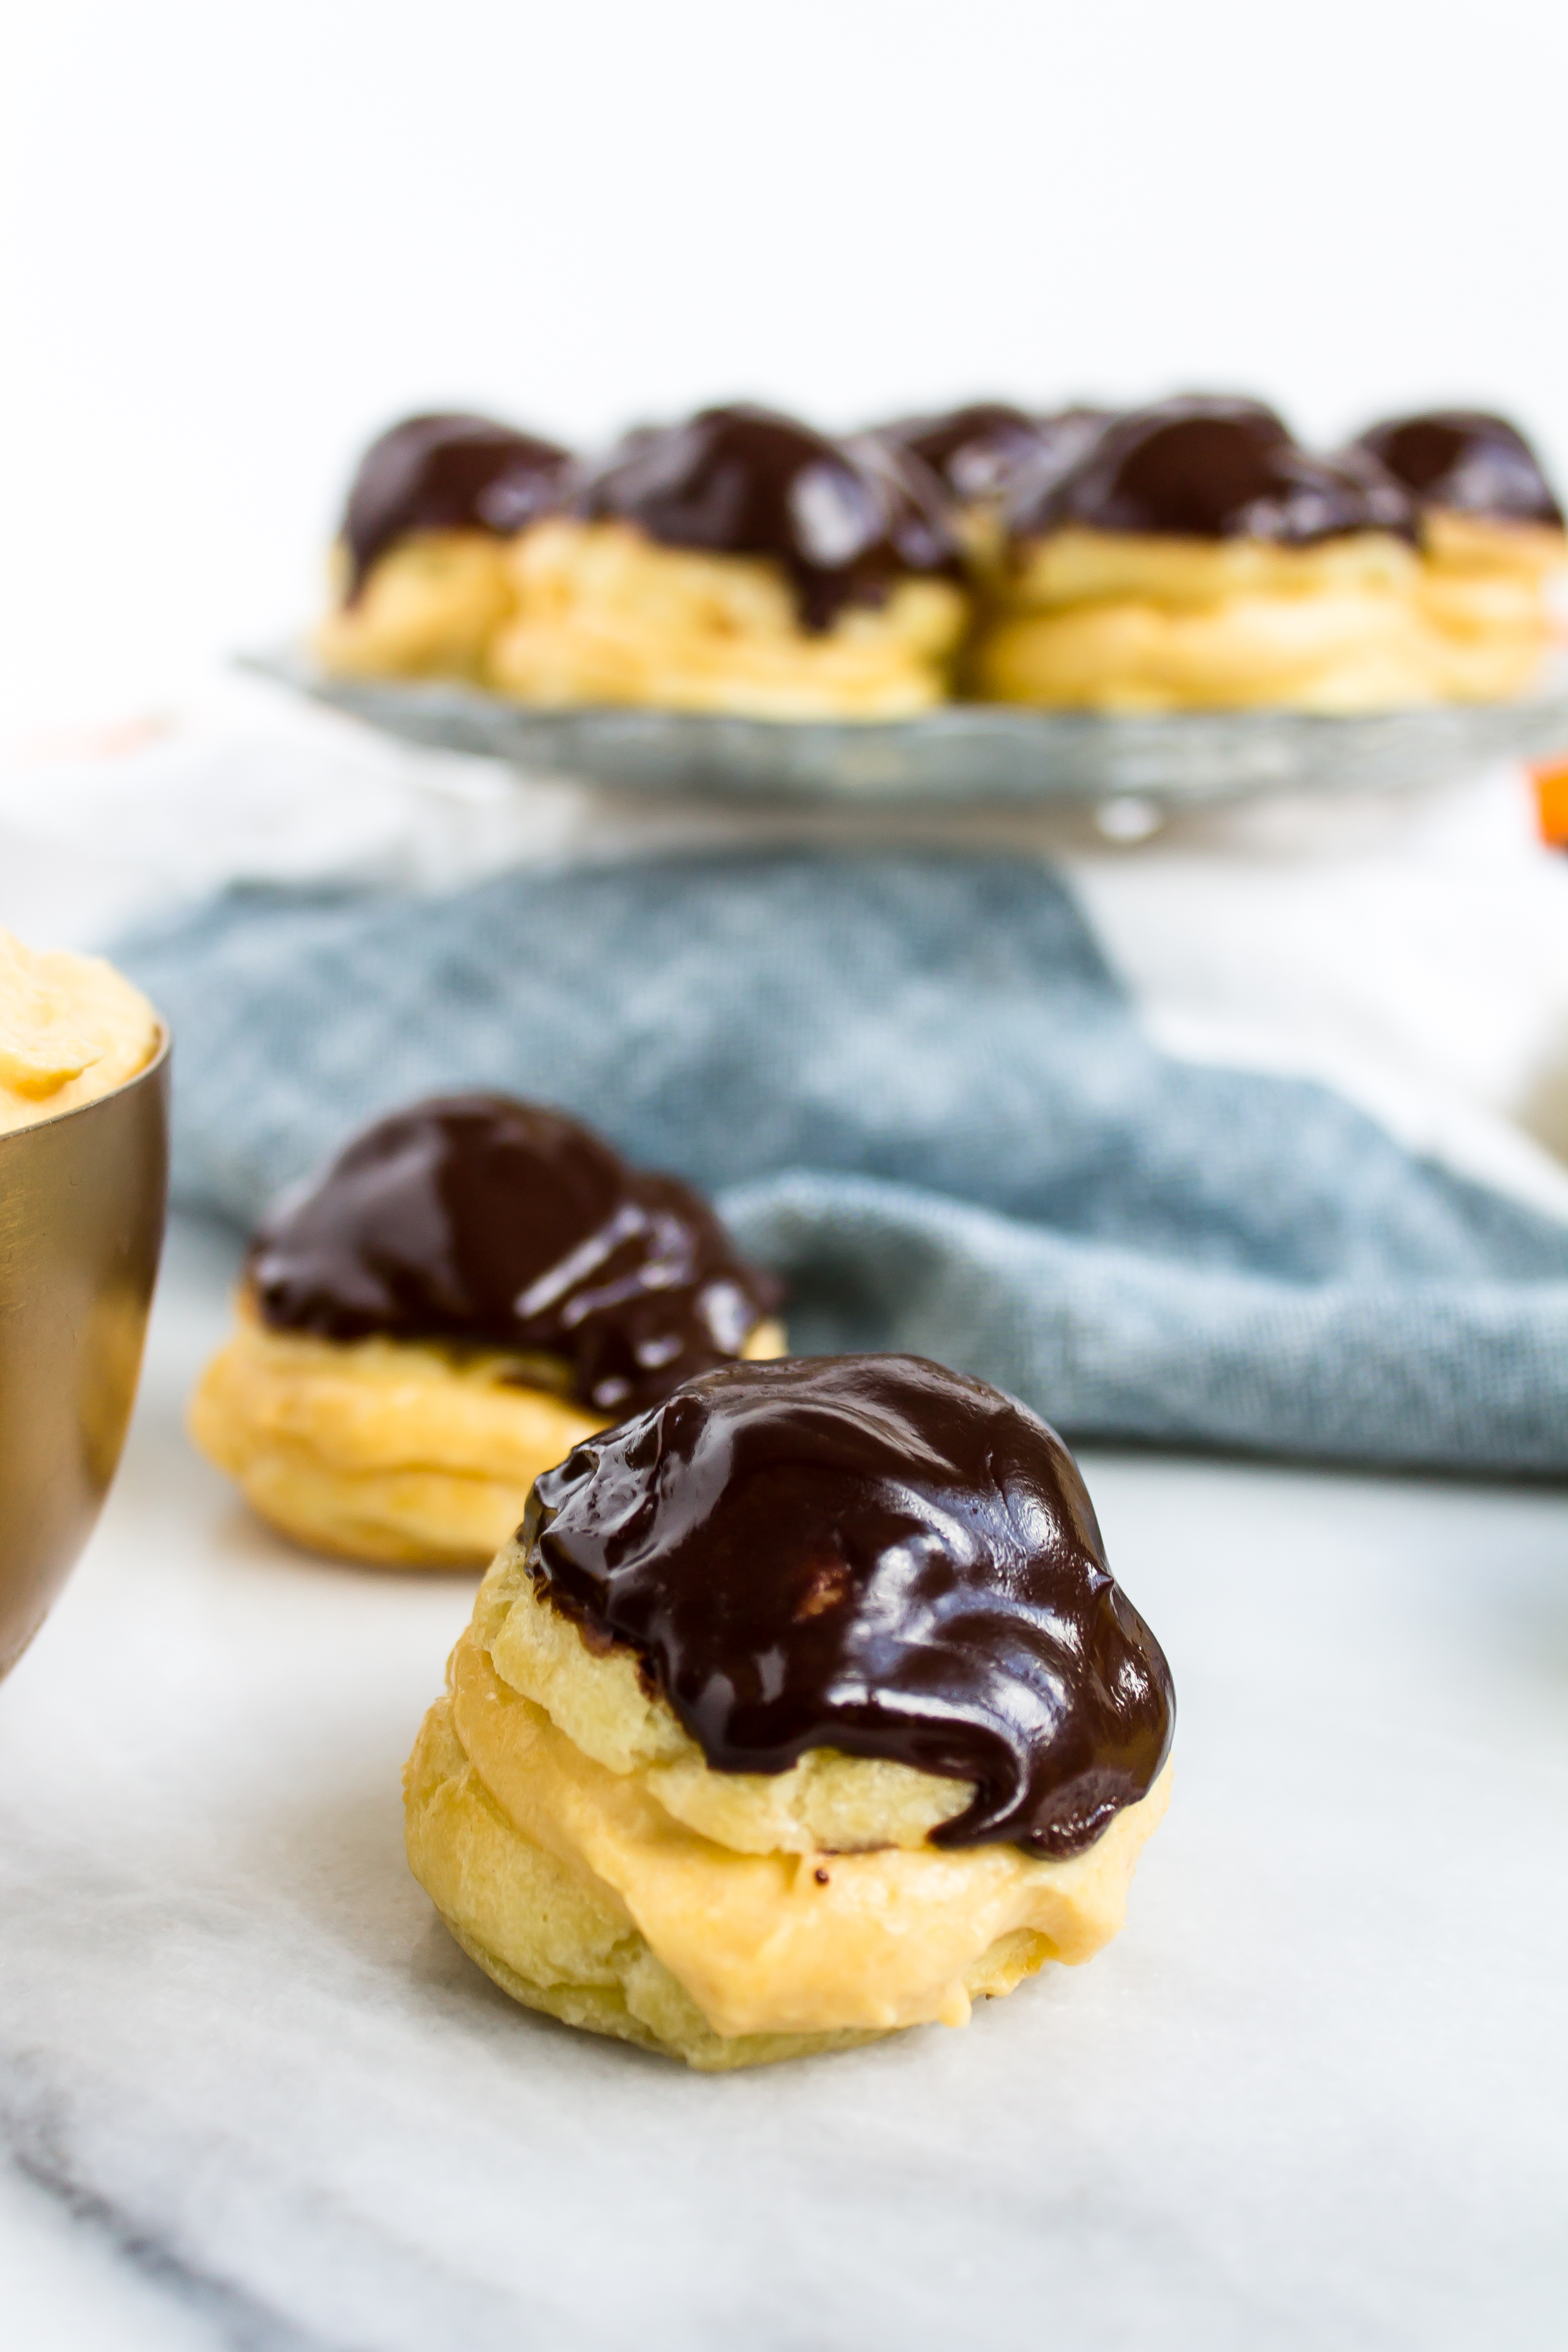 Impress your friends this season with fluffy, delicious pumpkin cream puffs with chocolate ganache. | www.passthecookies.com